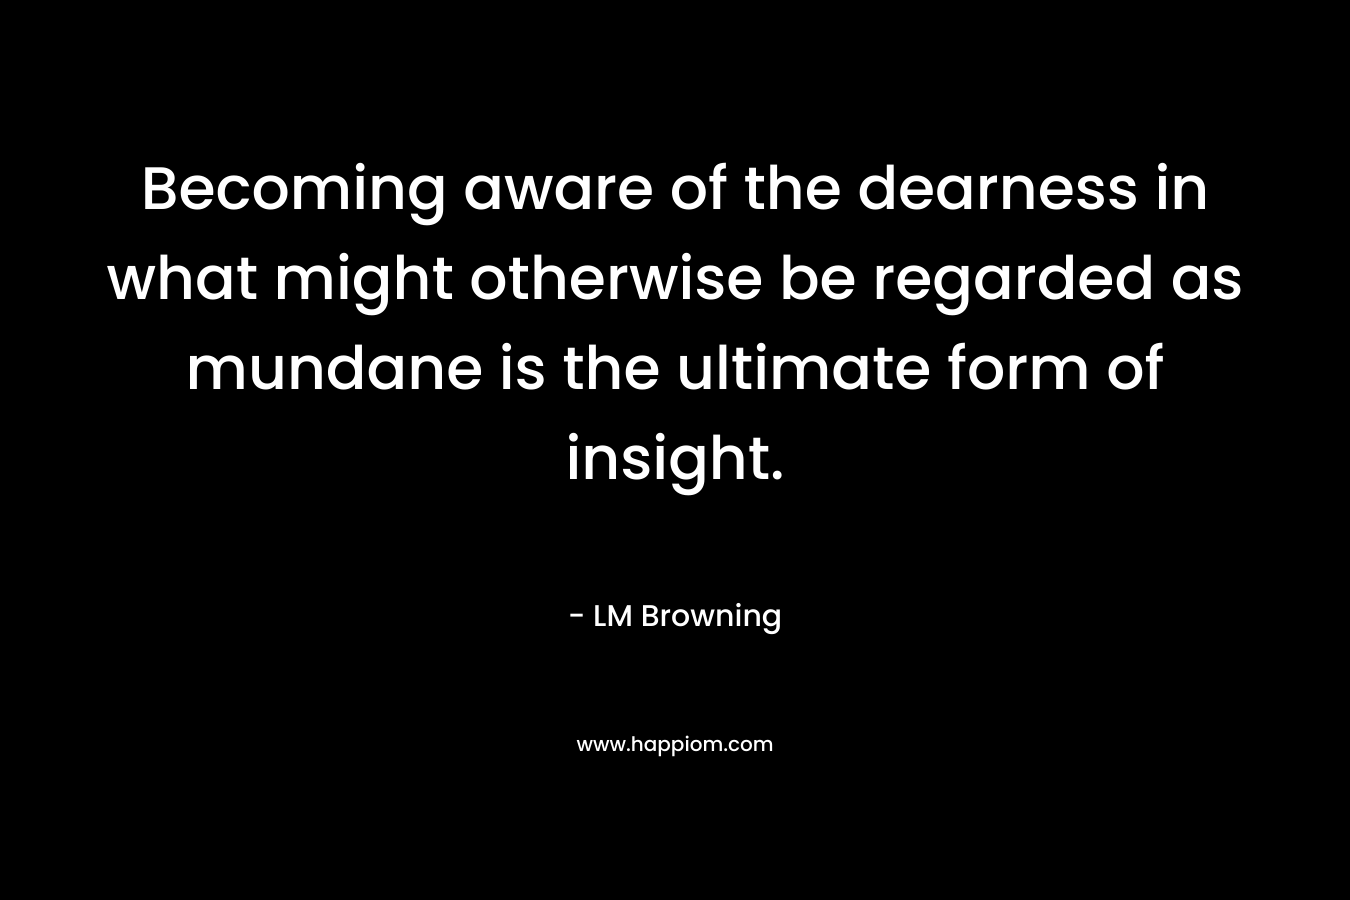 Becoming aware of the dearness in what might otherwise be regarded as mundane is the ultimate form of insight.